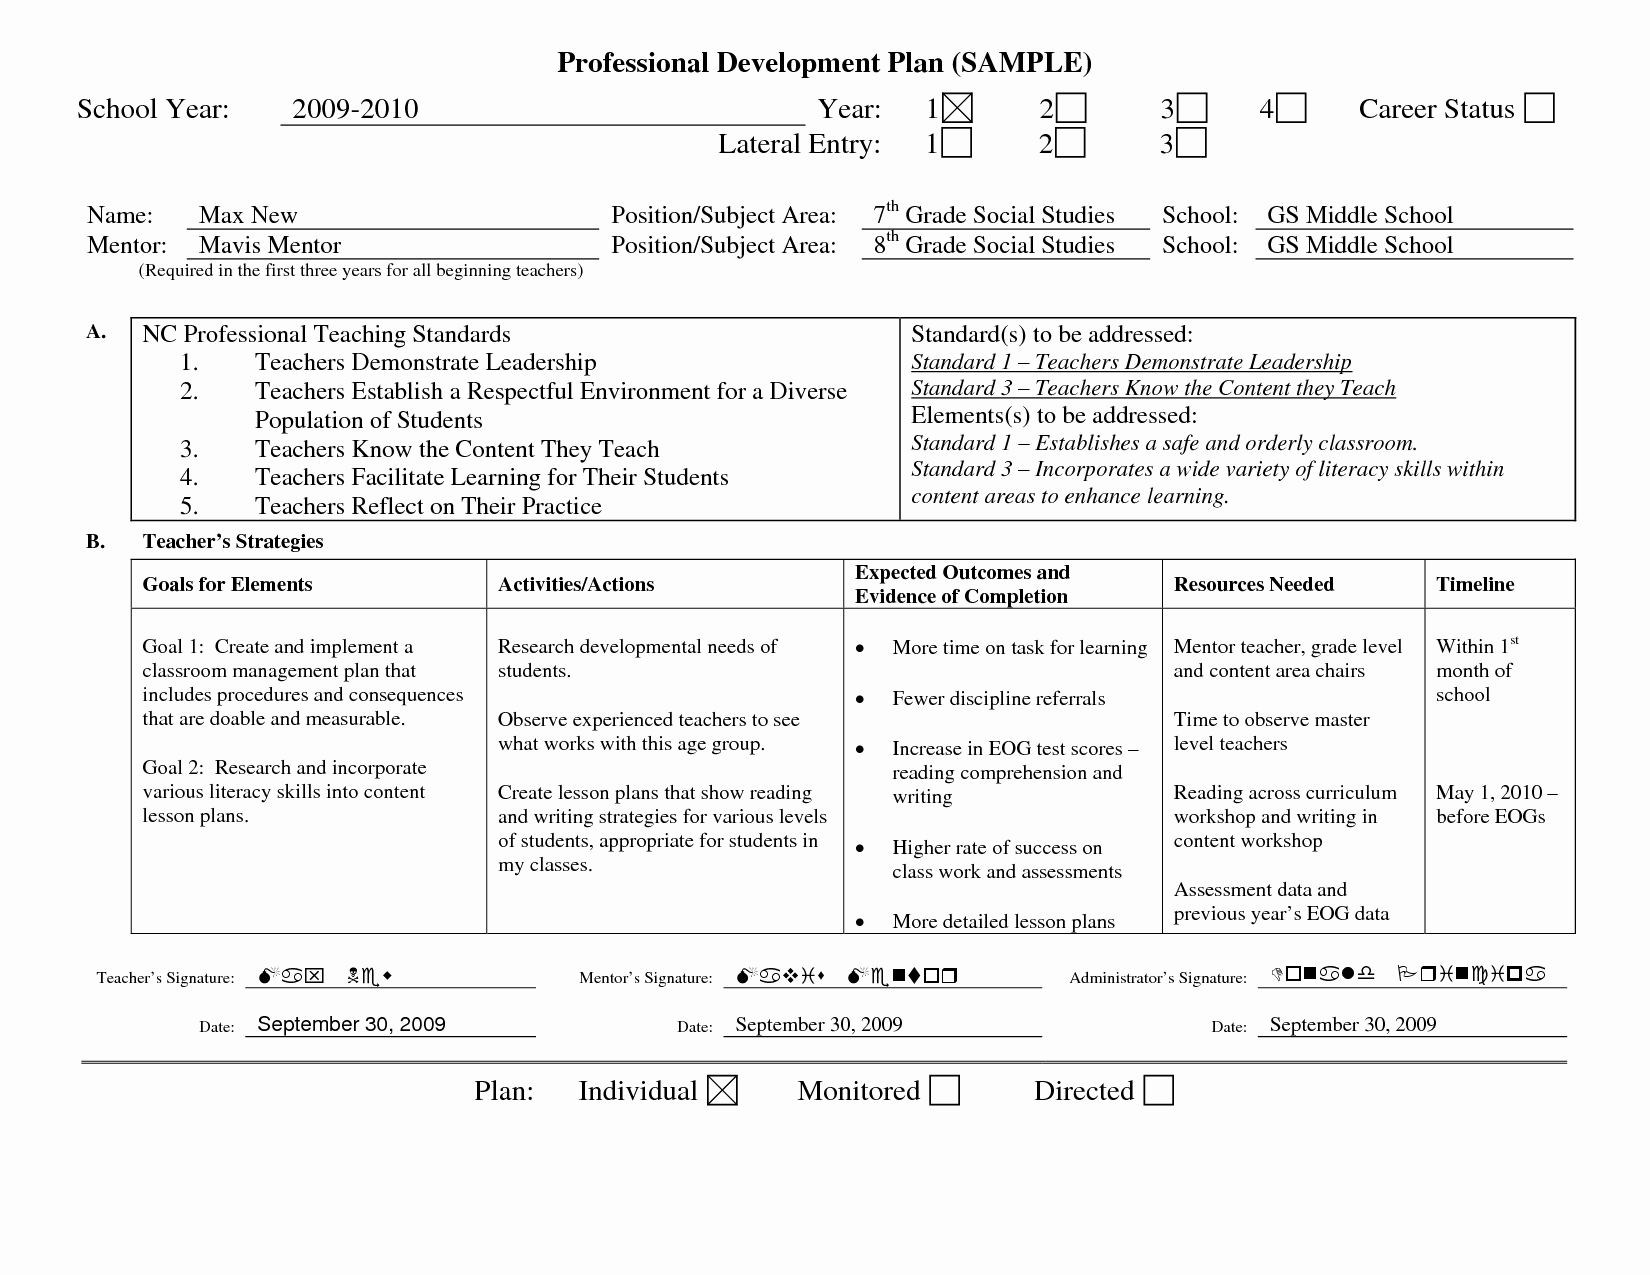 Professional Development Plan Template Fresh Professional Learning Plan Examples Google Search